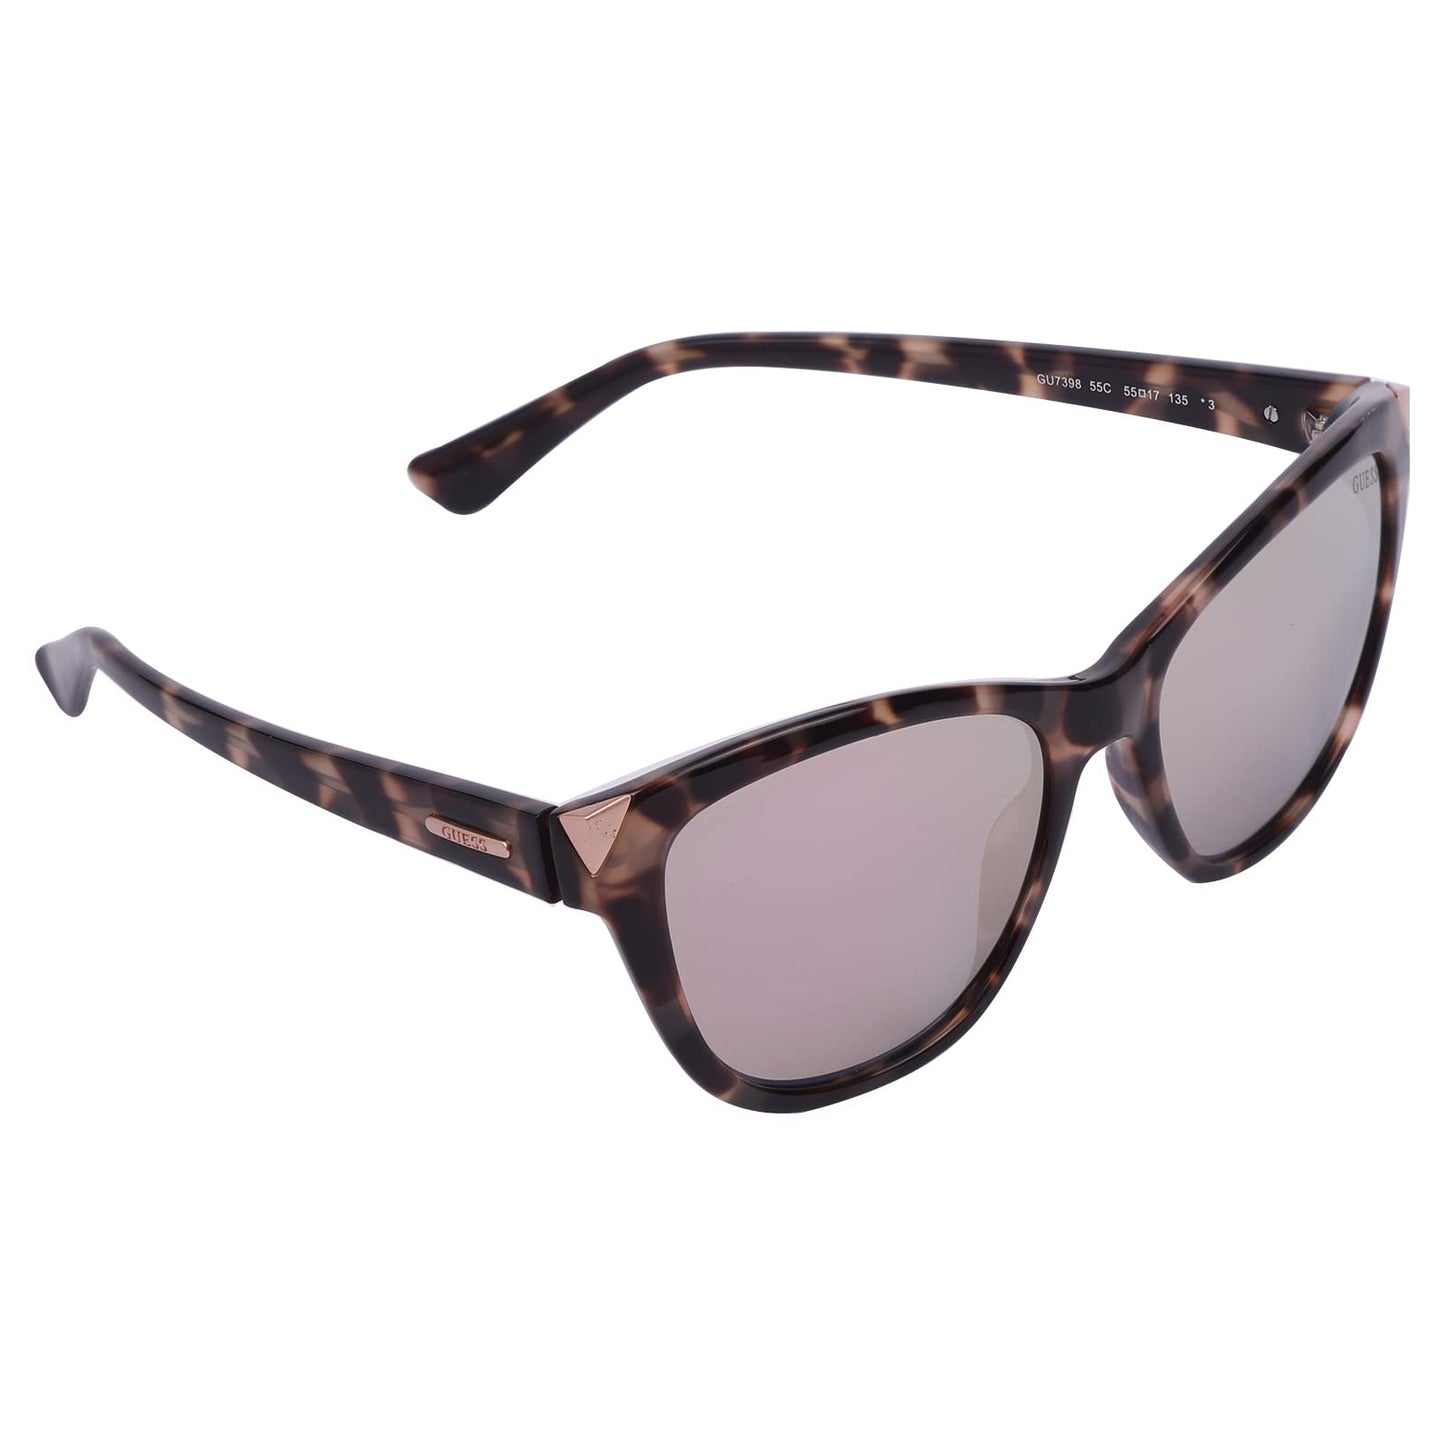 GUESS Mirrored Cat Eye Women's Sunglasses 7398 55C|55|Pink Color Lens